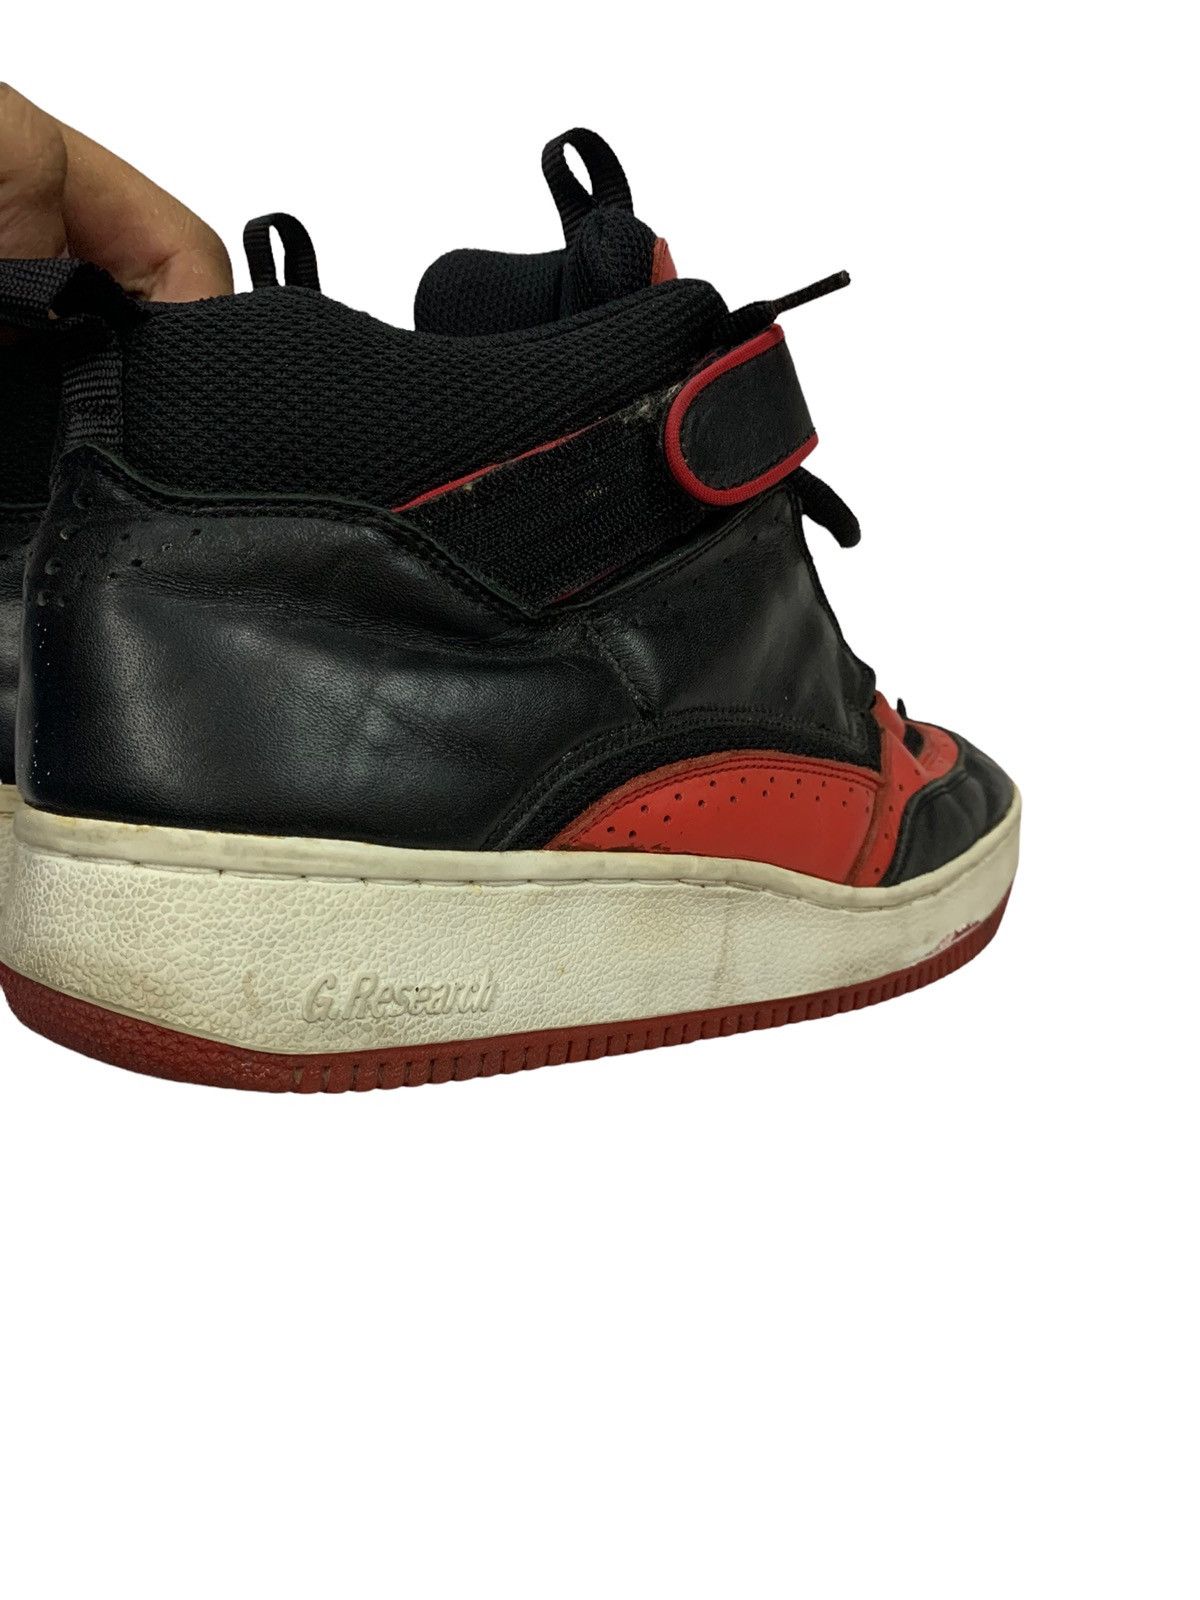 🔥RARE VTG GENERAL RESEARCH MID TOP SNEAKERS - 7